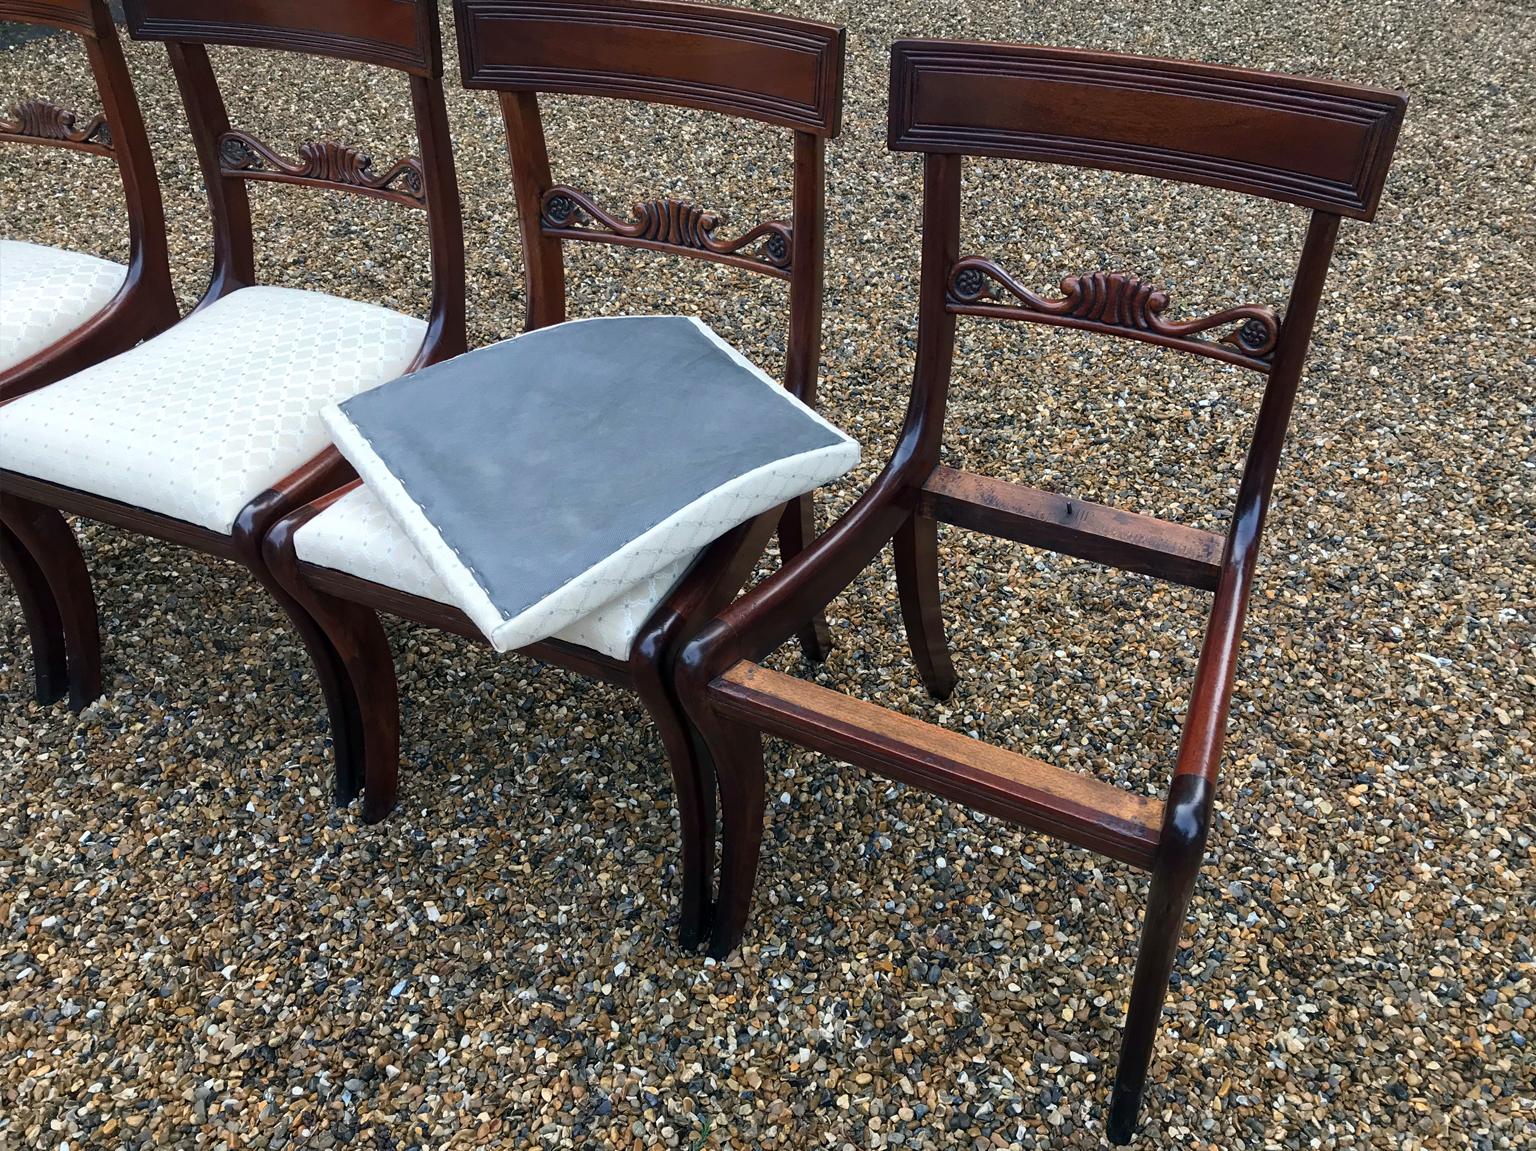 Set of Four English 19th Century Regency Mahogany Dining Chairs In Good Condition In Richmond, London, Surrey